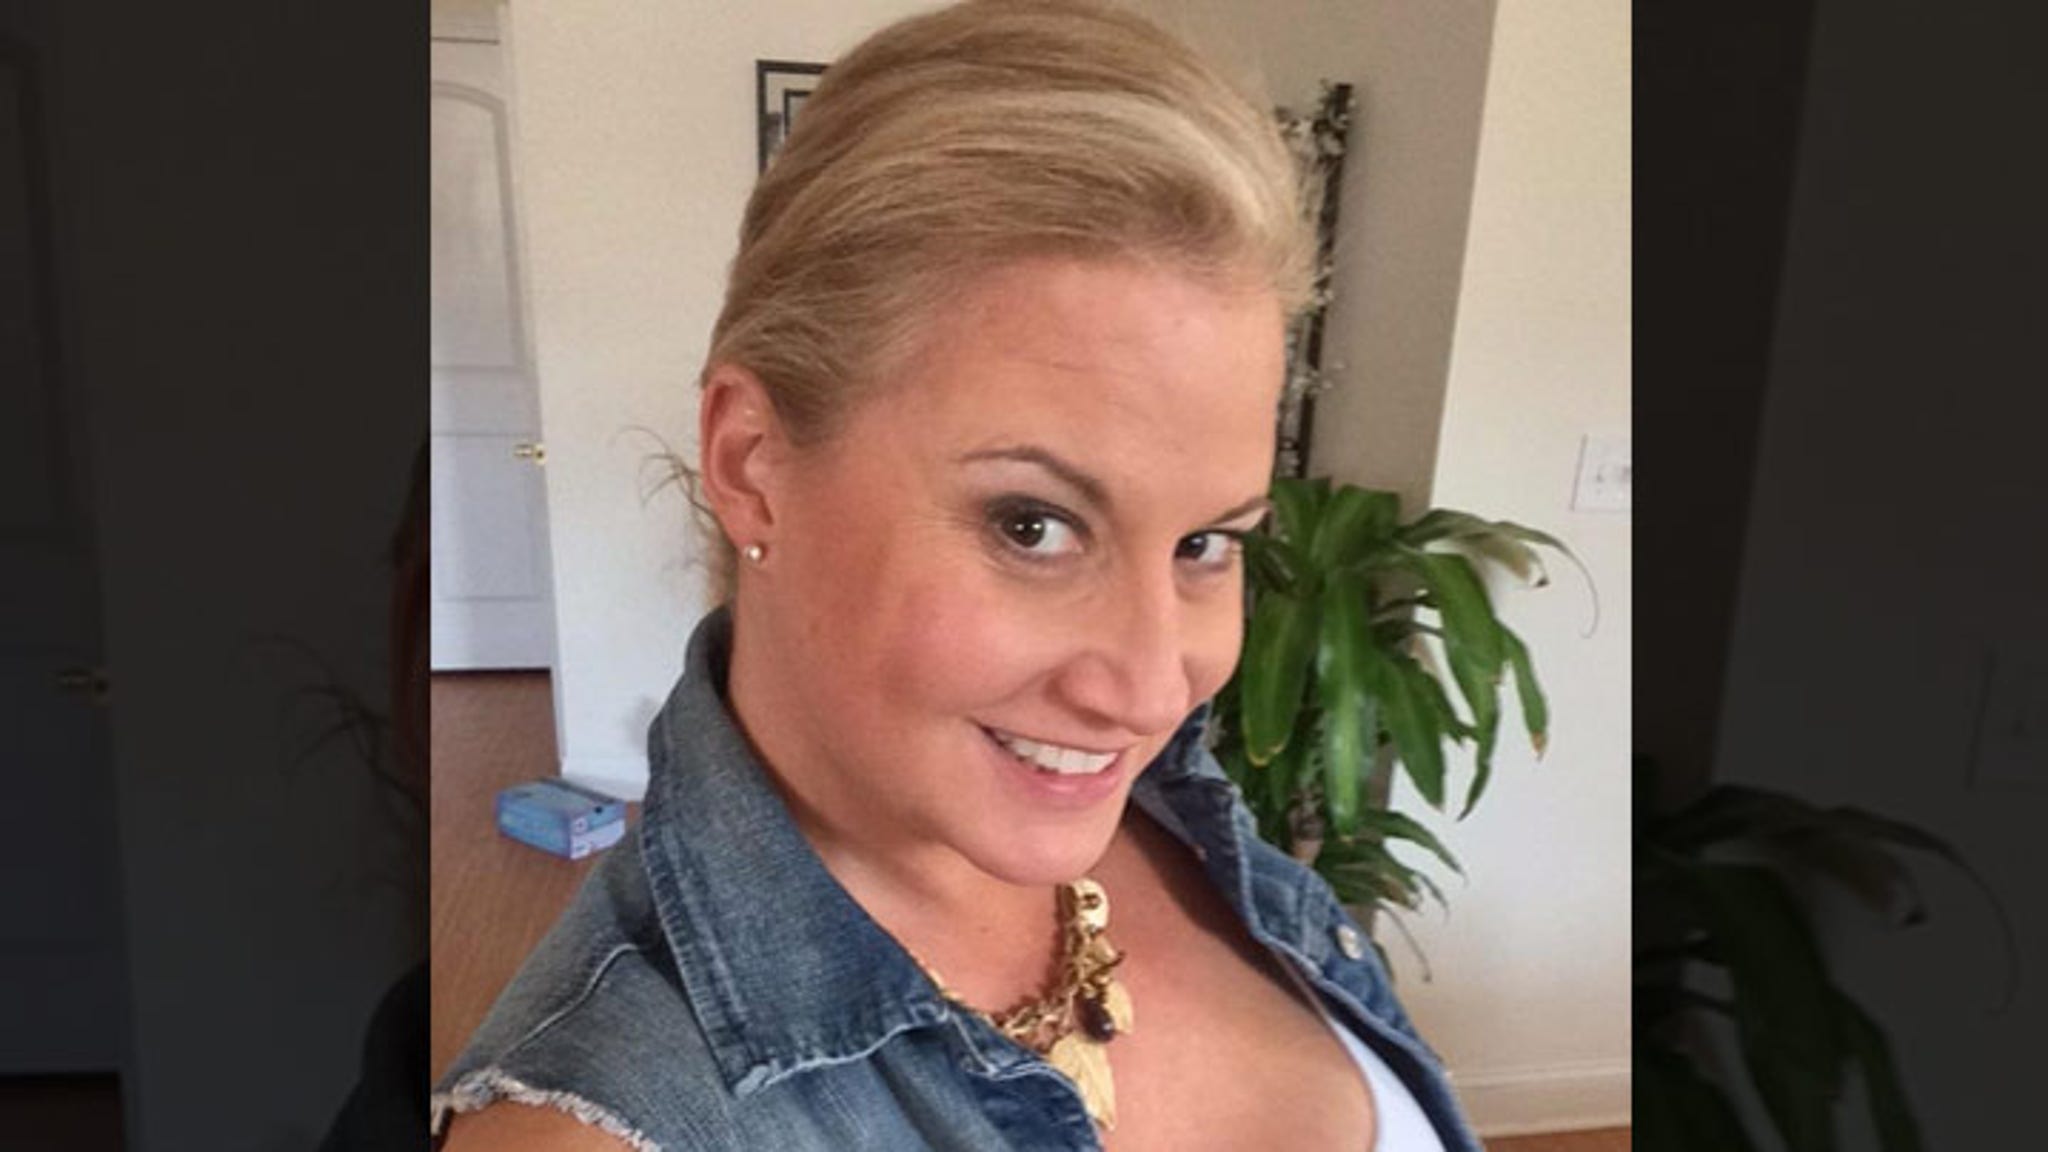 WWE fans rejoice -- Tammy Sytch has stripped down to have sex on camera